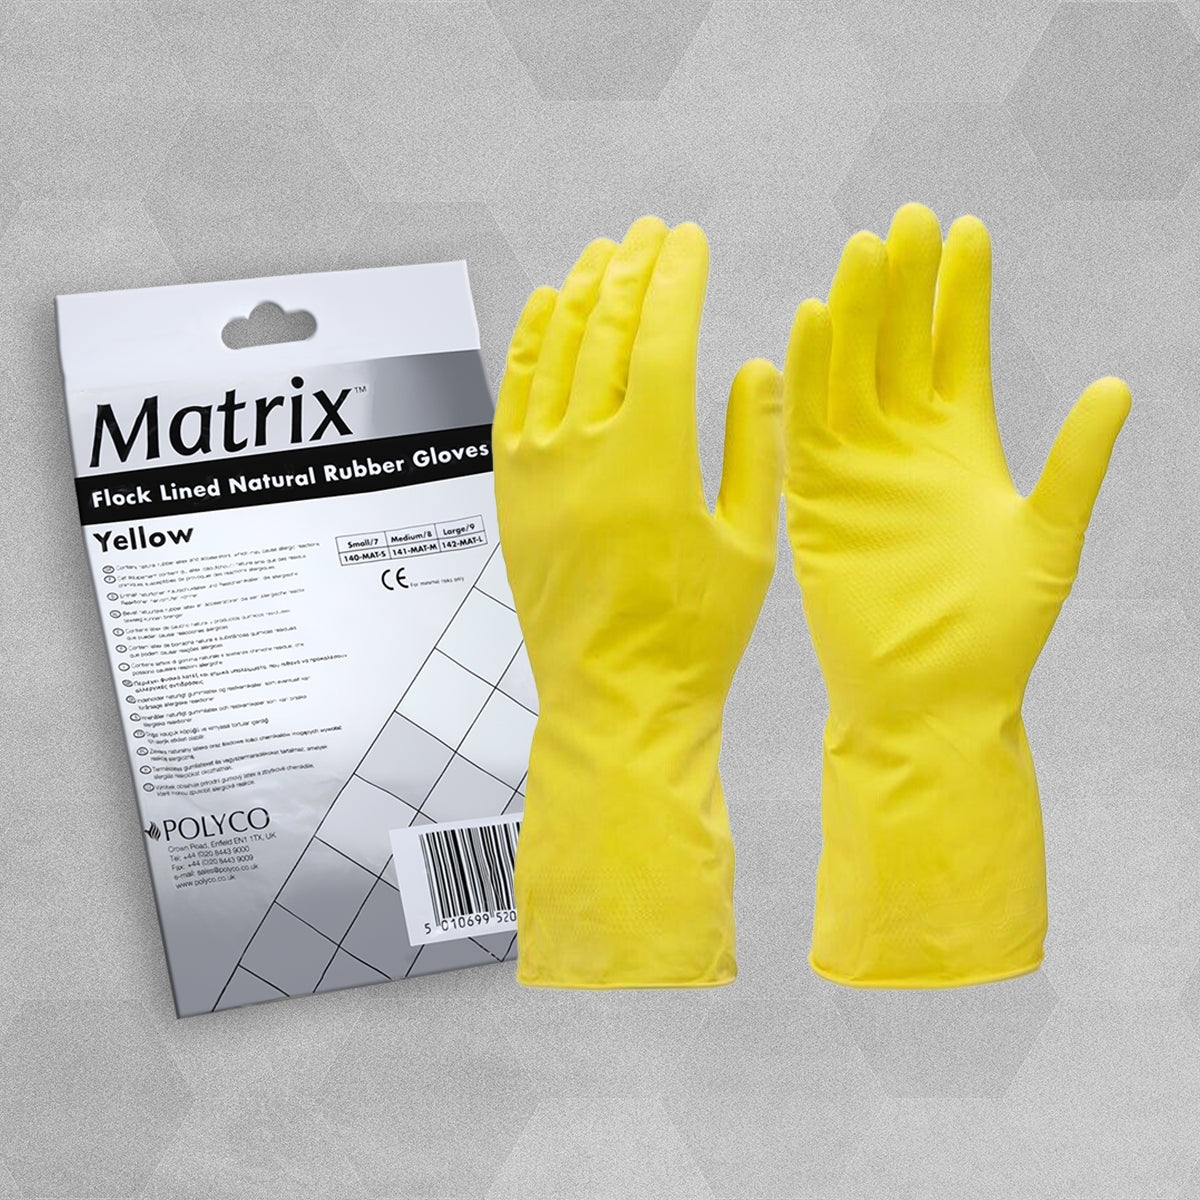 Matrix Flock Lined Natural Rubber Gloves - Yellow - Large